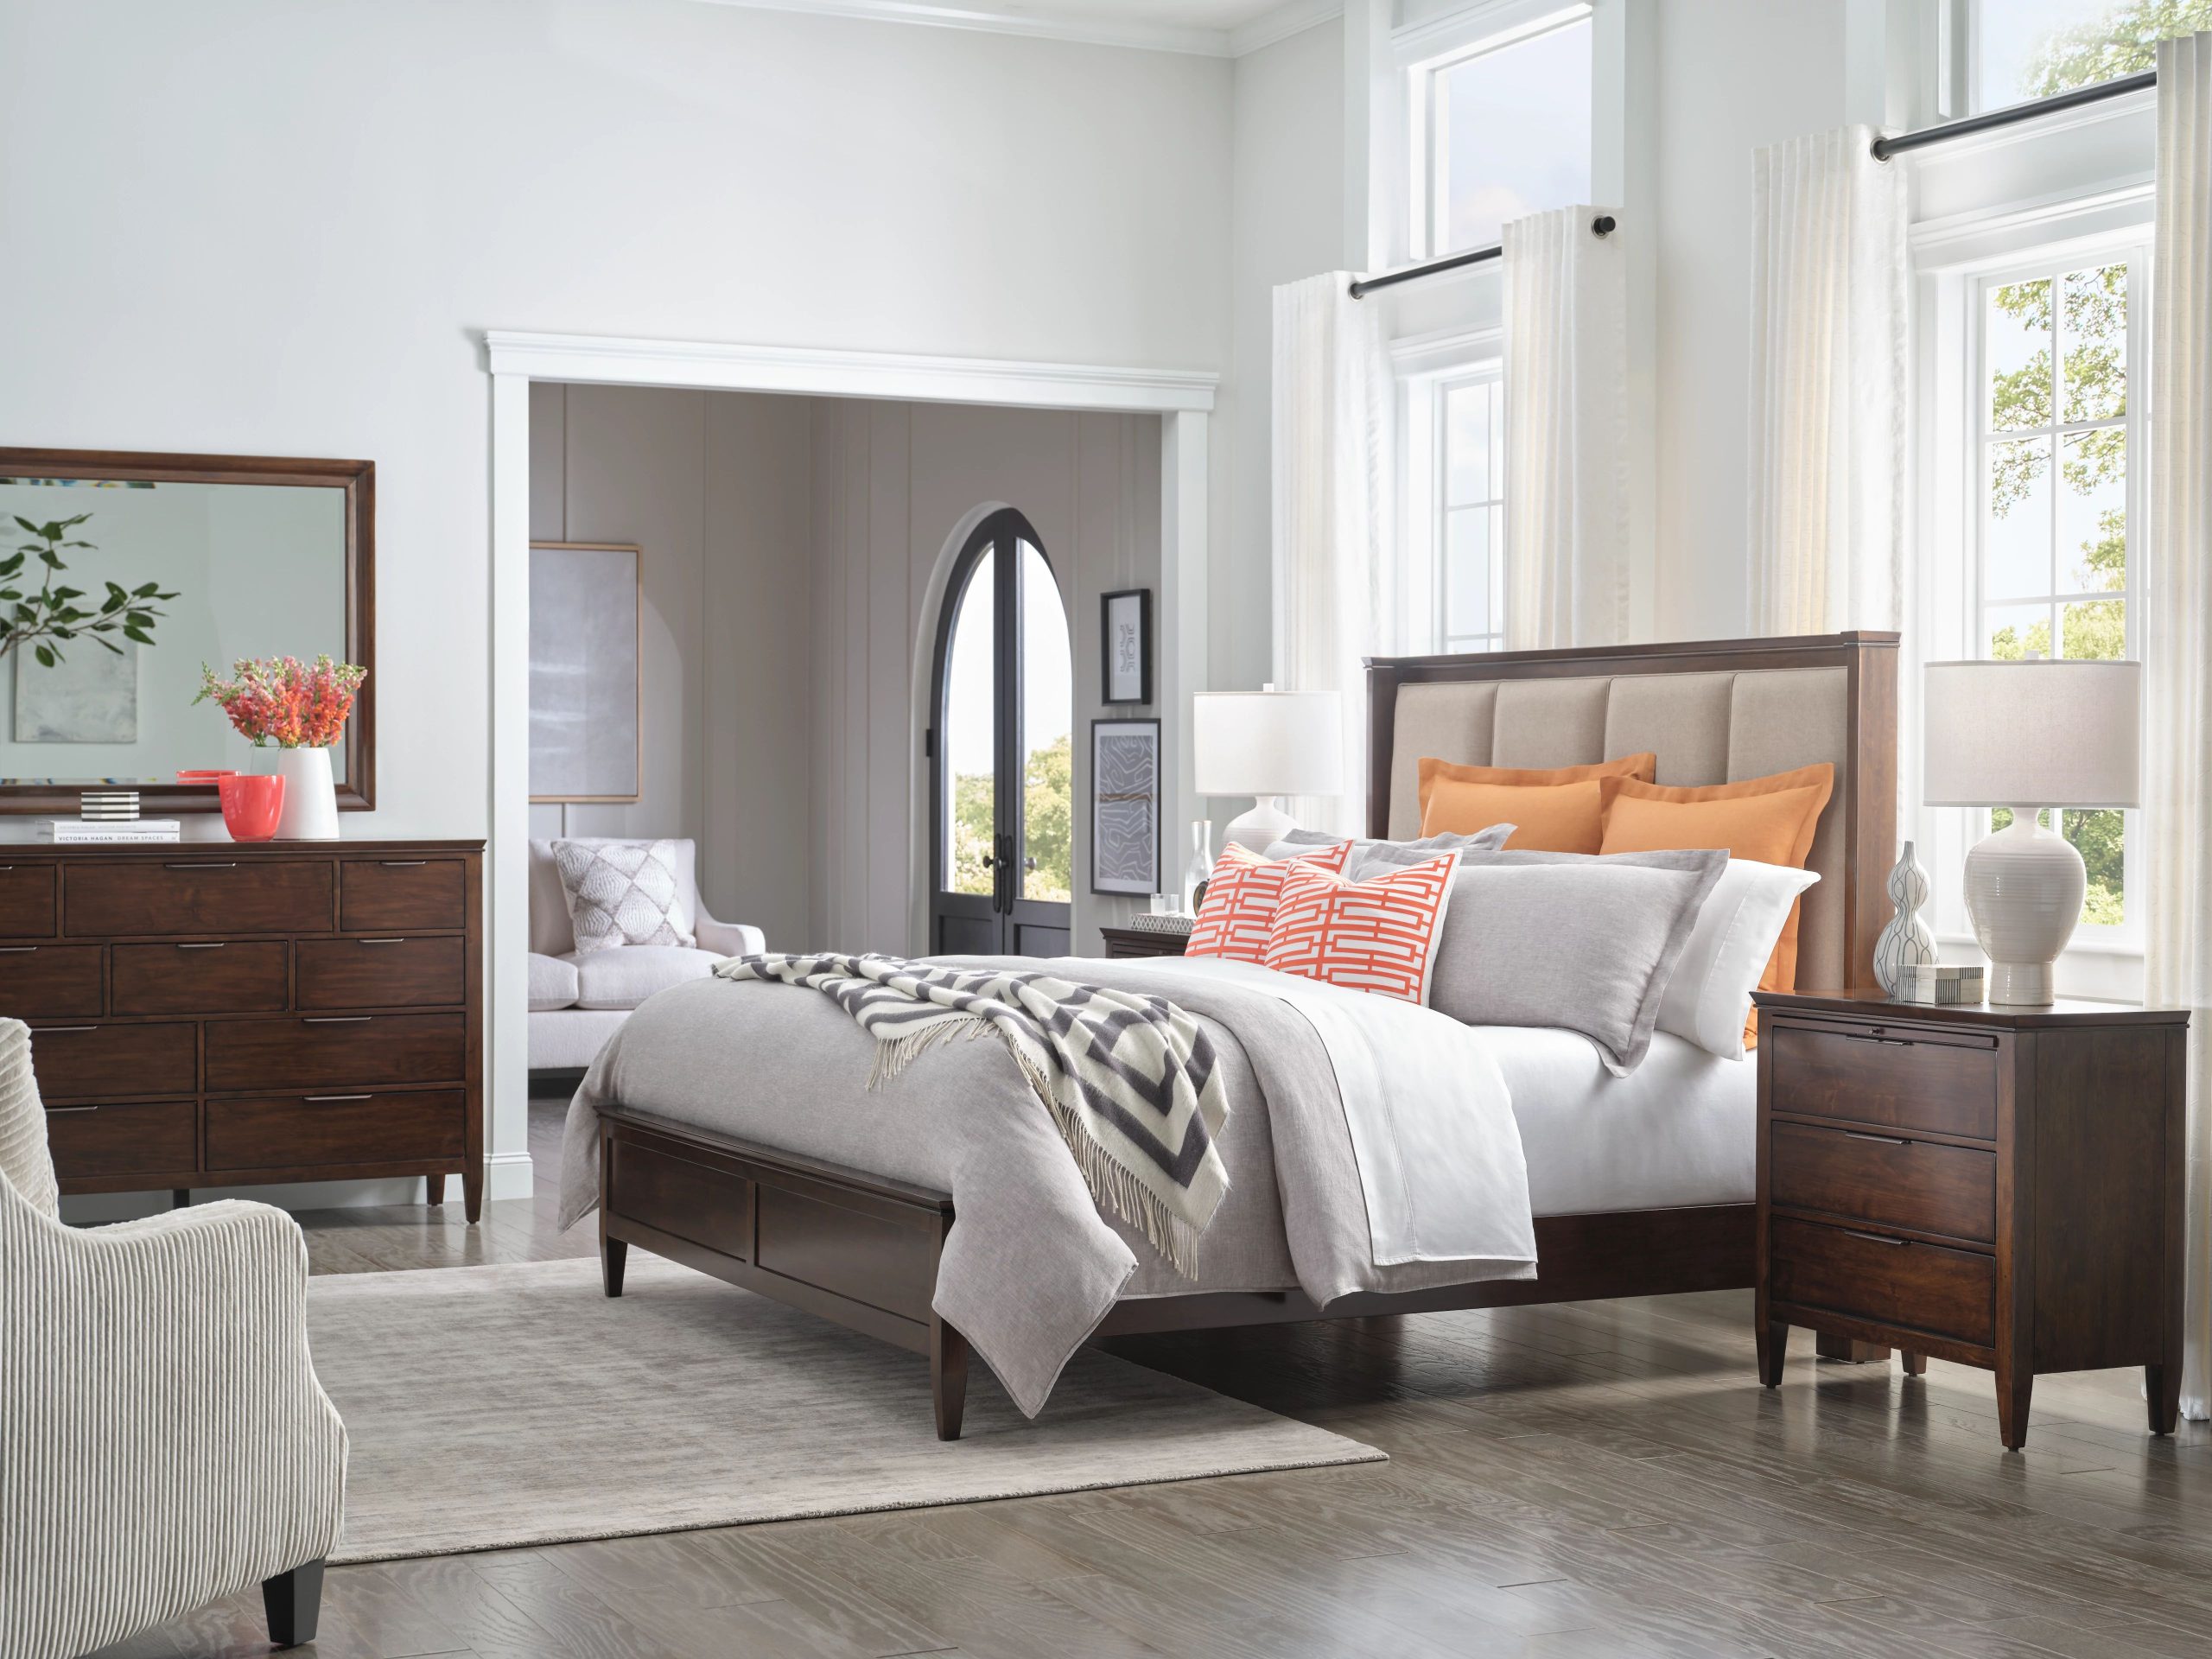 Make your home holiday ready with a Kincaid bed from EF Brannon.